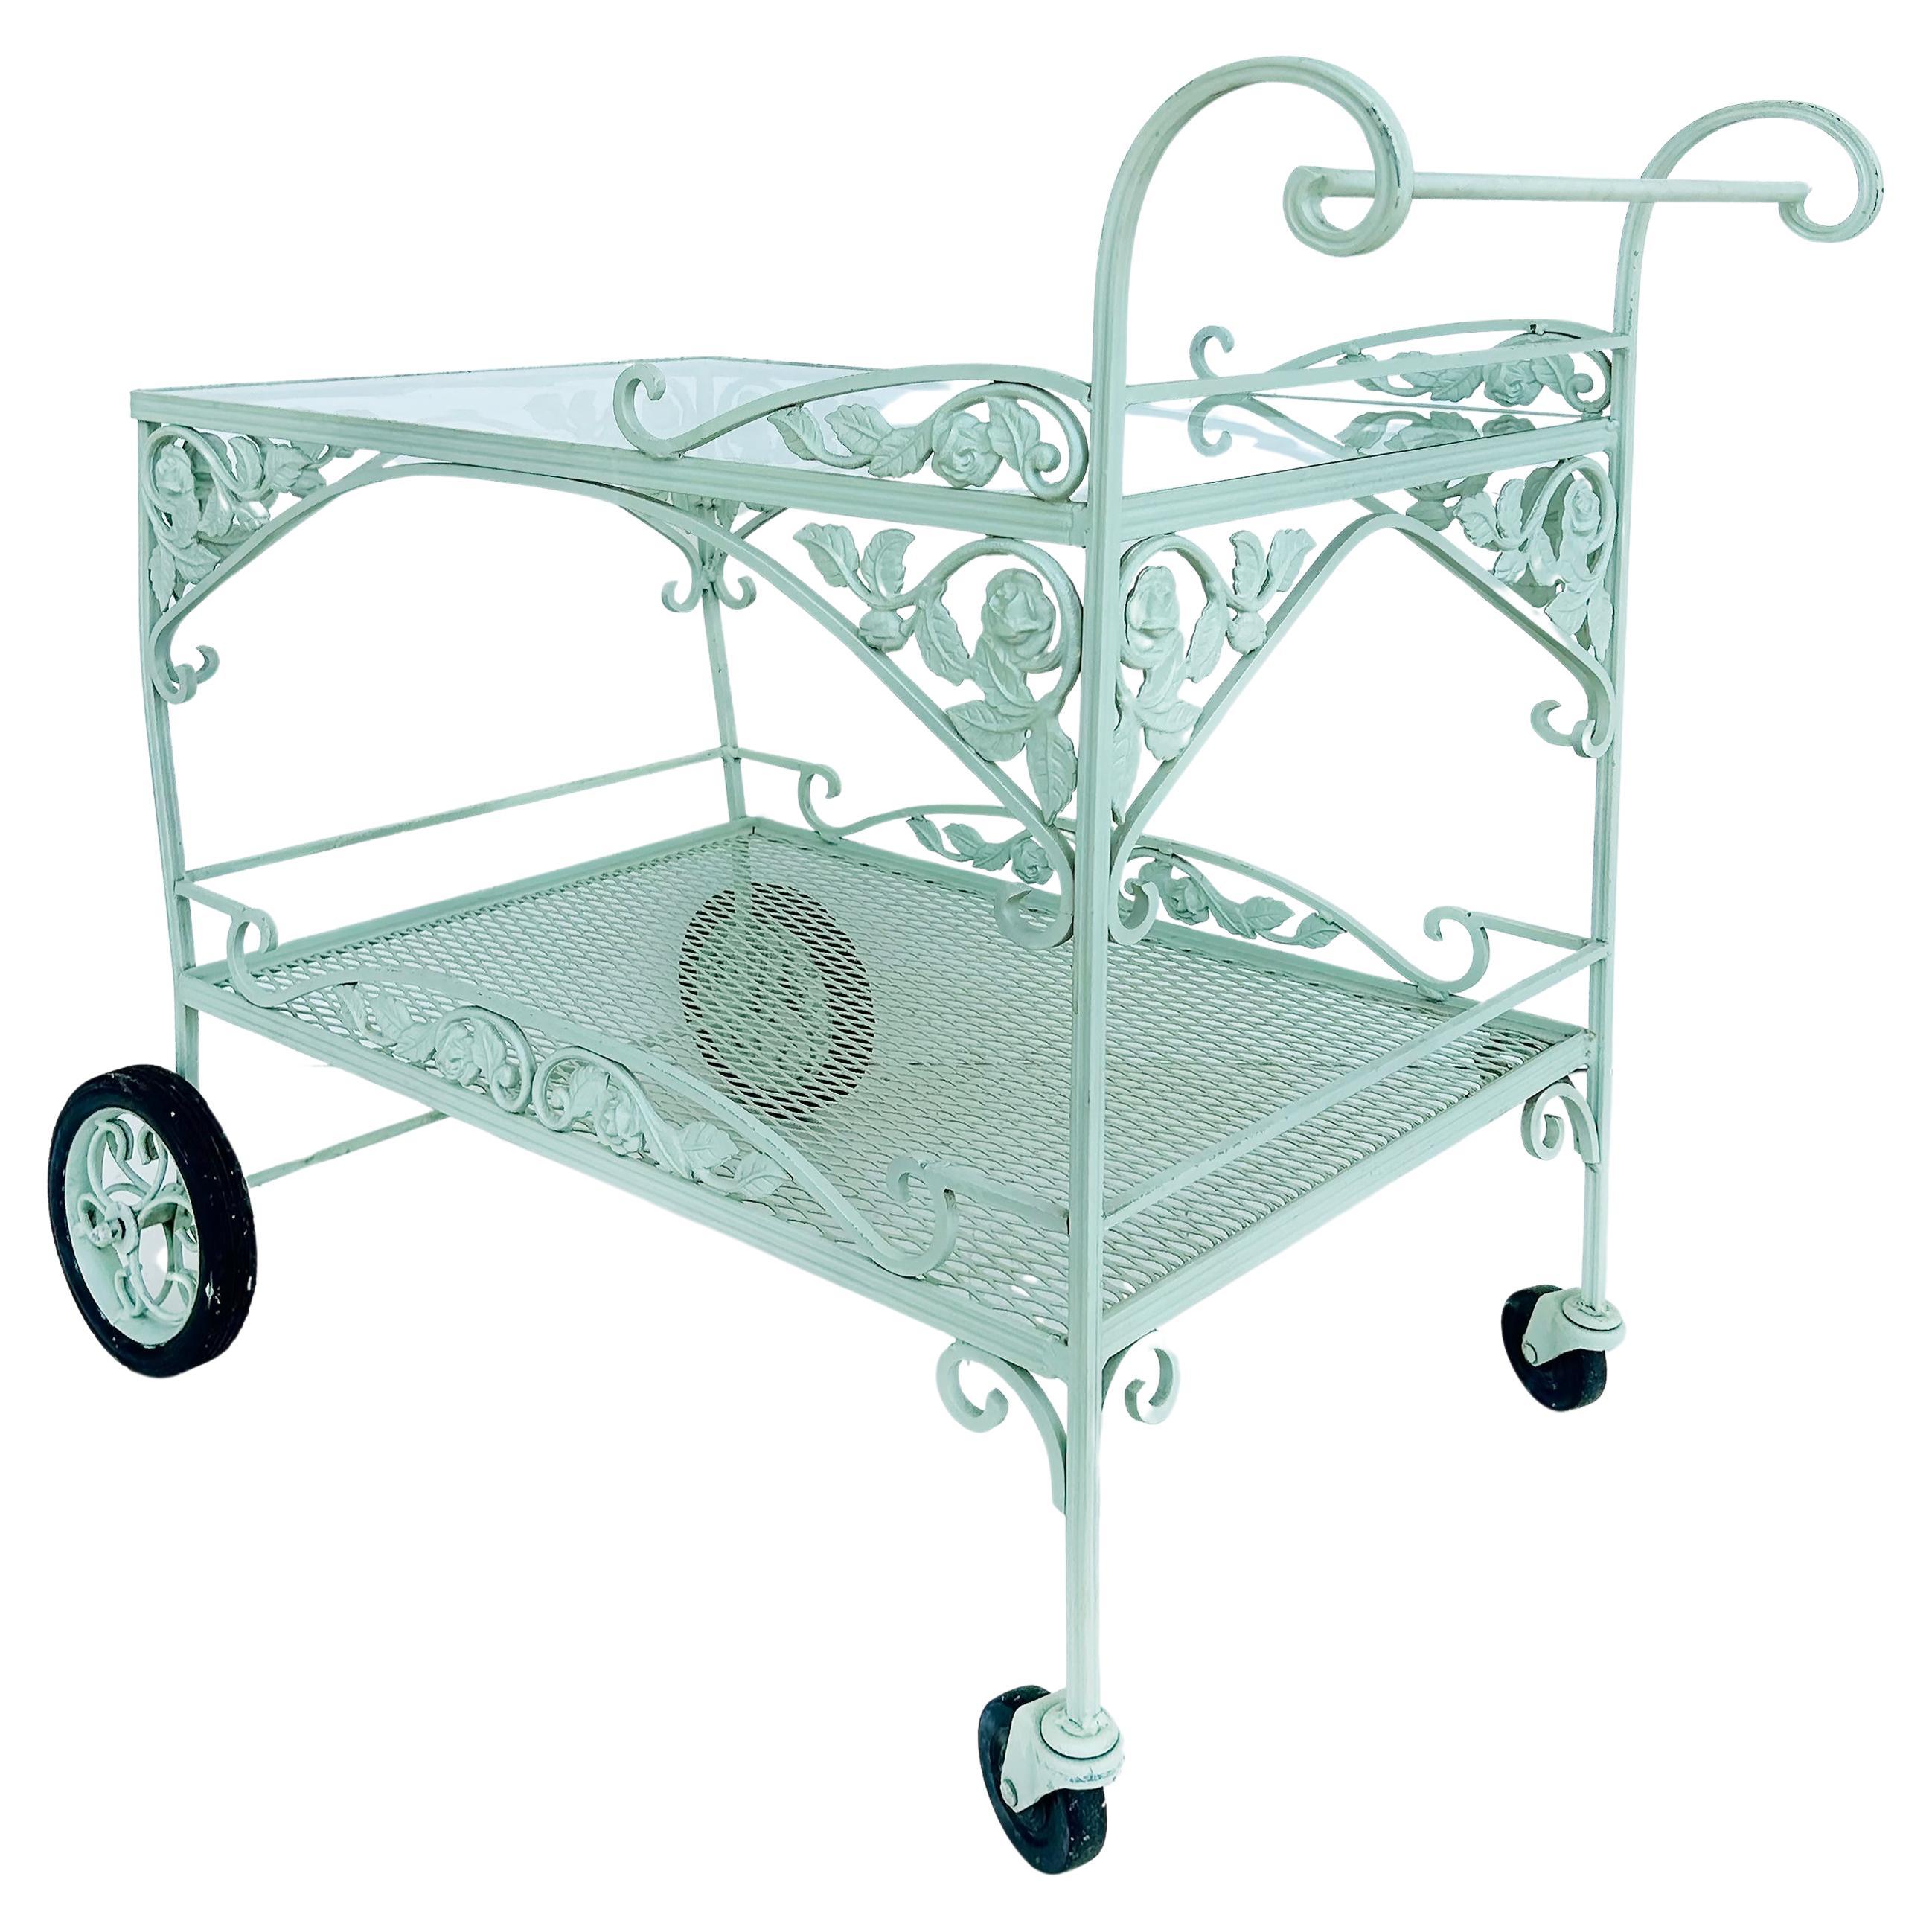 Russell Woodard Wrought Iron Patio/Serving/Bar/Tea Cart With Floral Decoration

Offered for sale is a Russell Woodard painted wrought iron and glass patio/garden/pool serving cart with a glass top and raised on rubber wheels.  The matching table and